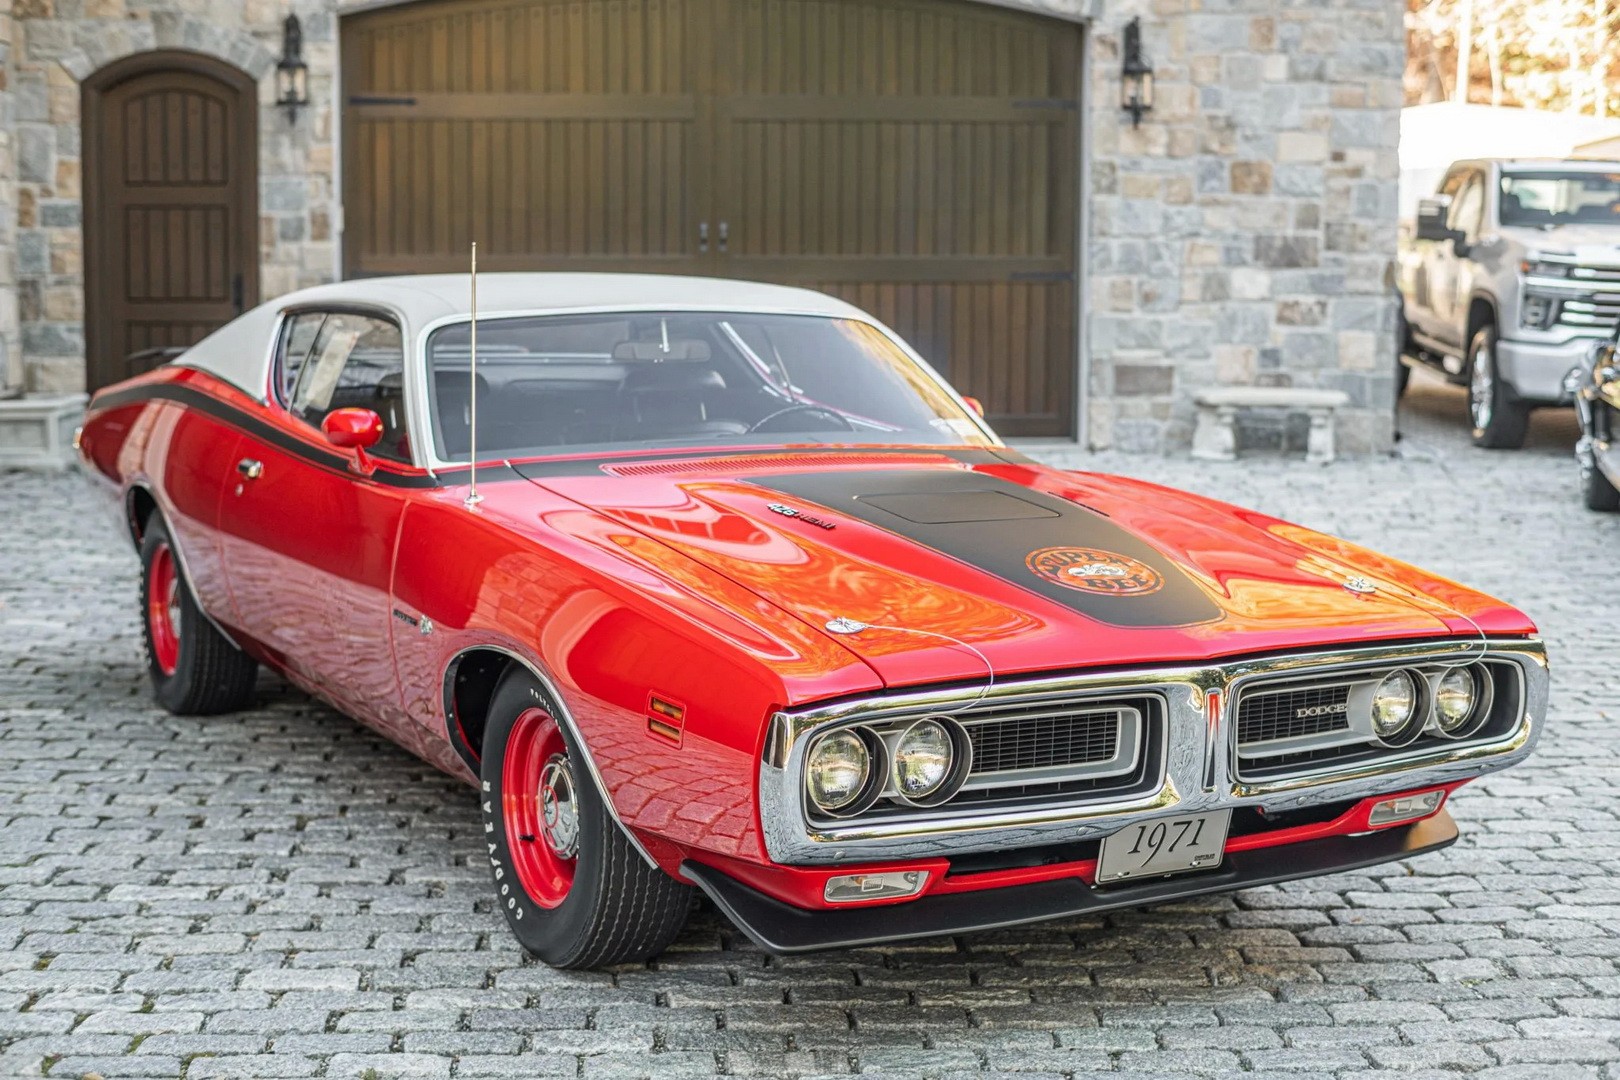 Spectacular 1971 Dodge Charger Super Bee With 426 Hemi and 4-Speed Manual  Seeks New Owner - autoevolution